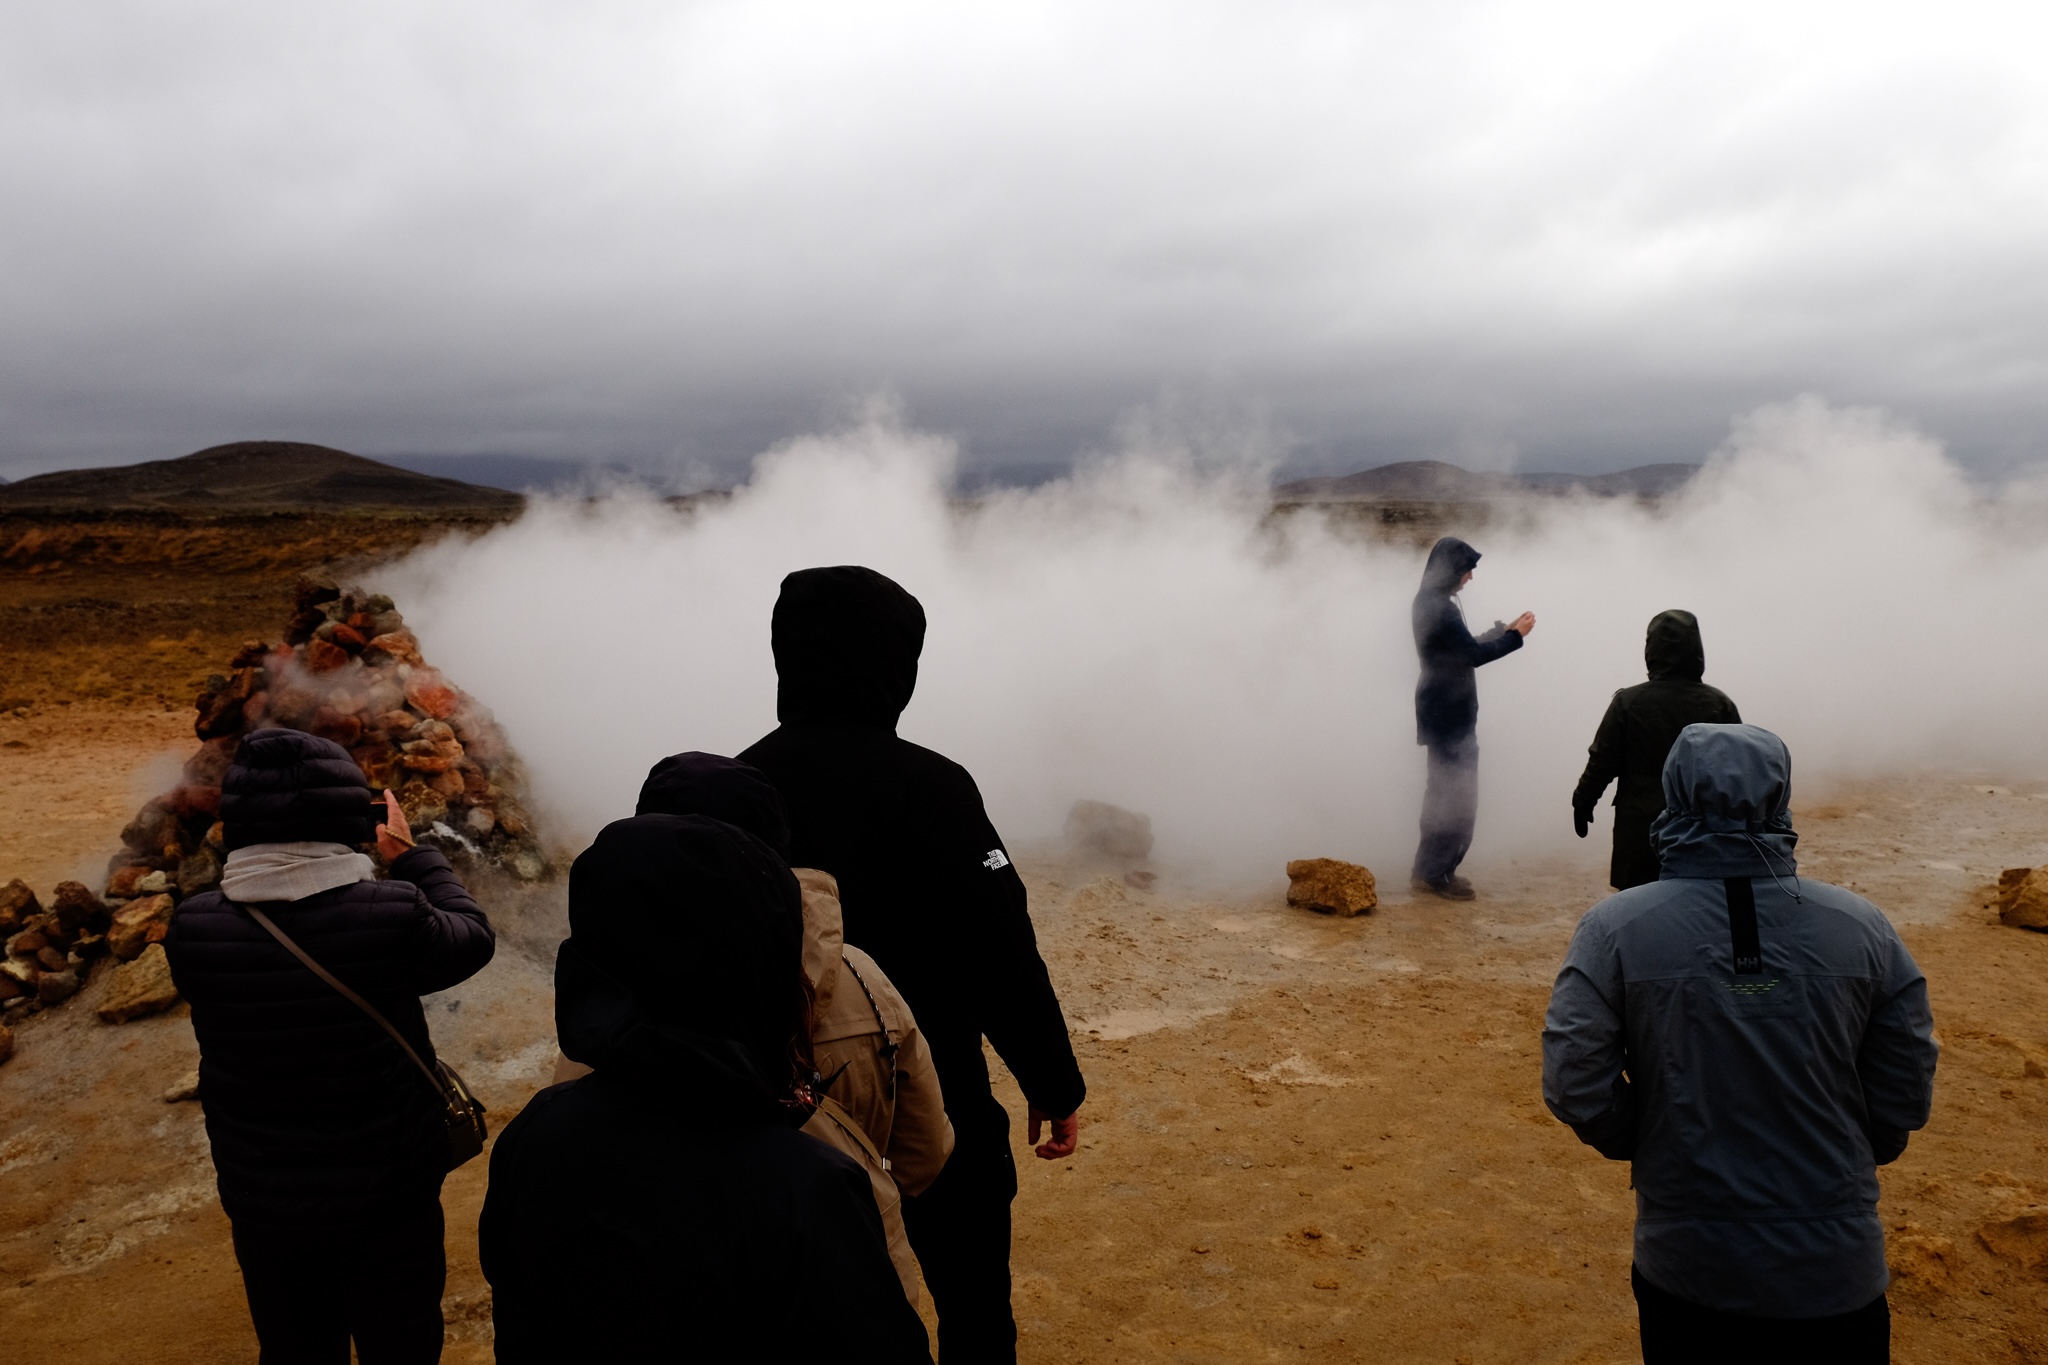 People standing in the steam of a geothermal steam geiser taking photos